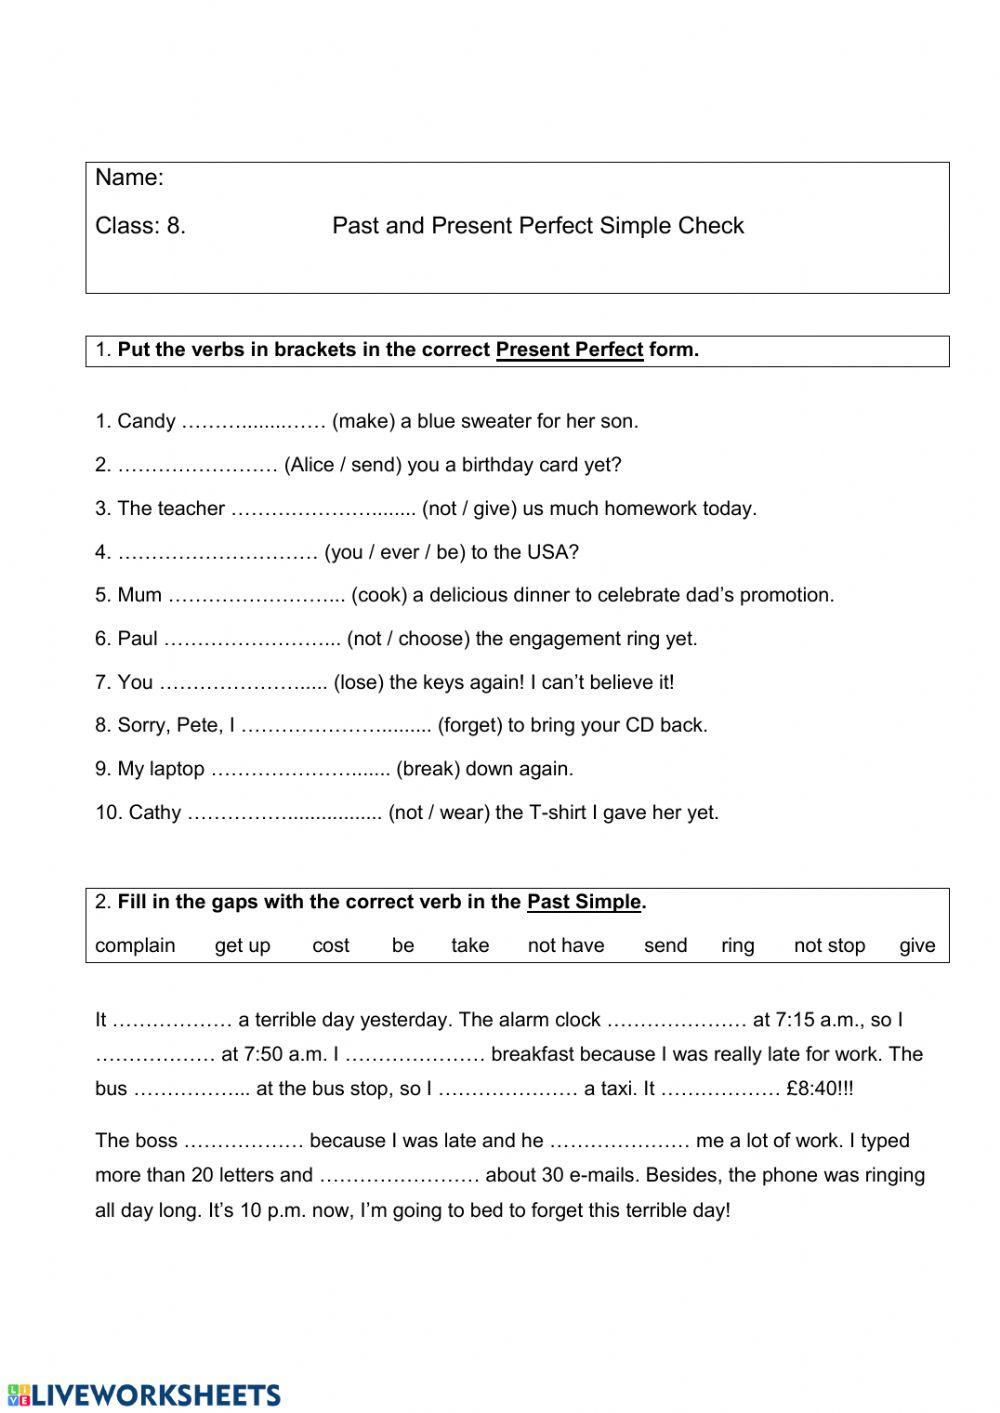 Past Simple and Present Perfect check worksheet | Live Worksheets